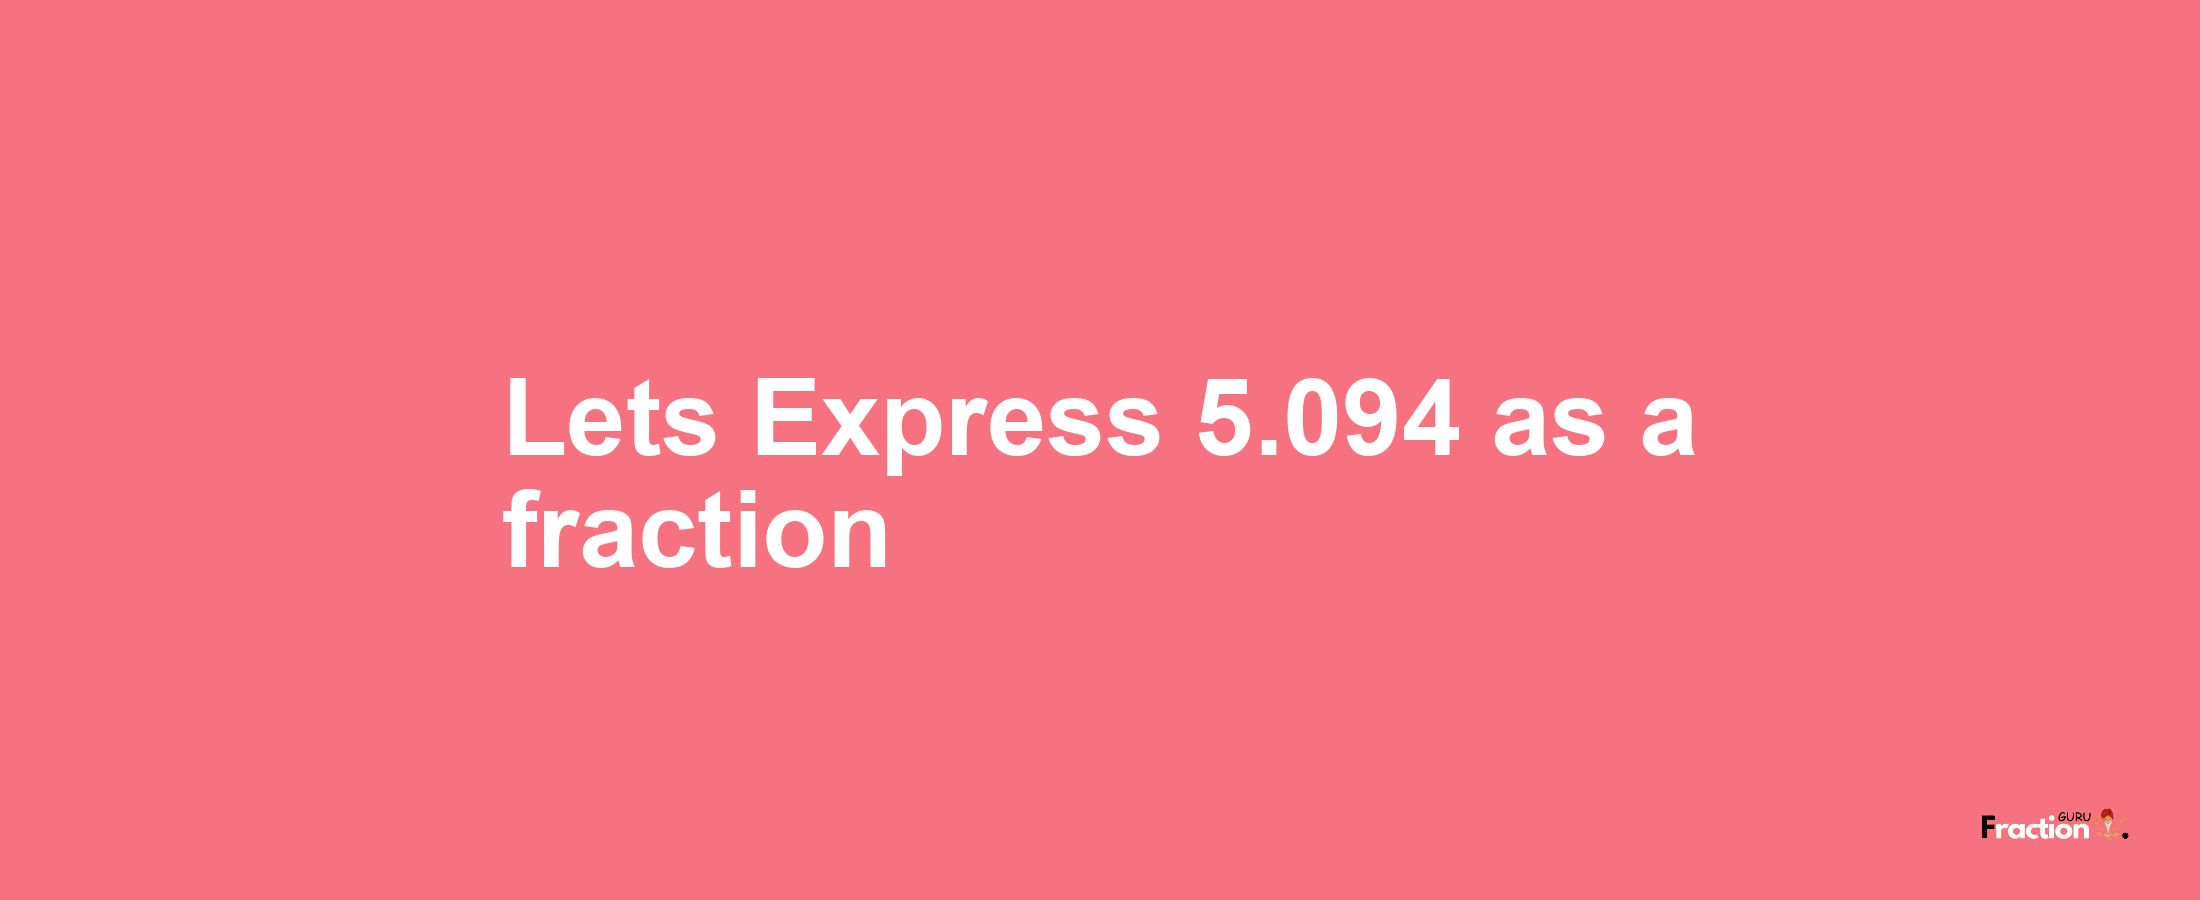 Lets Express 5.094 as afraction